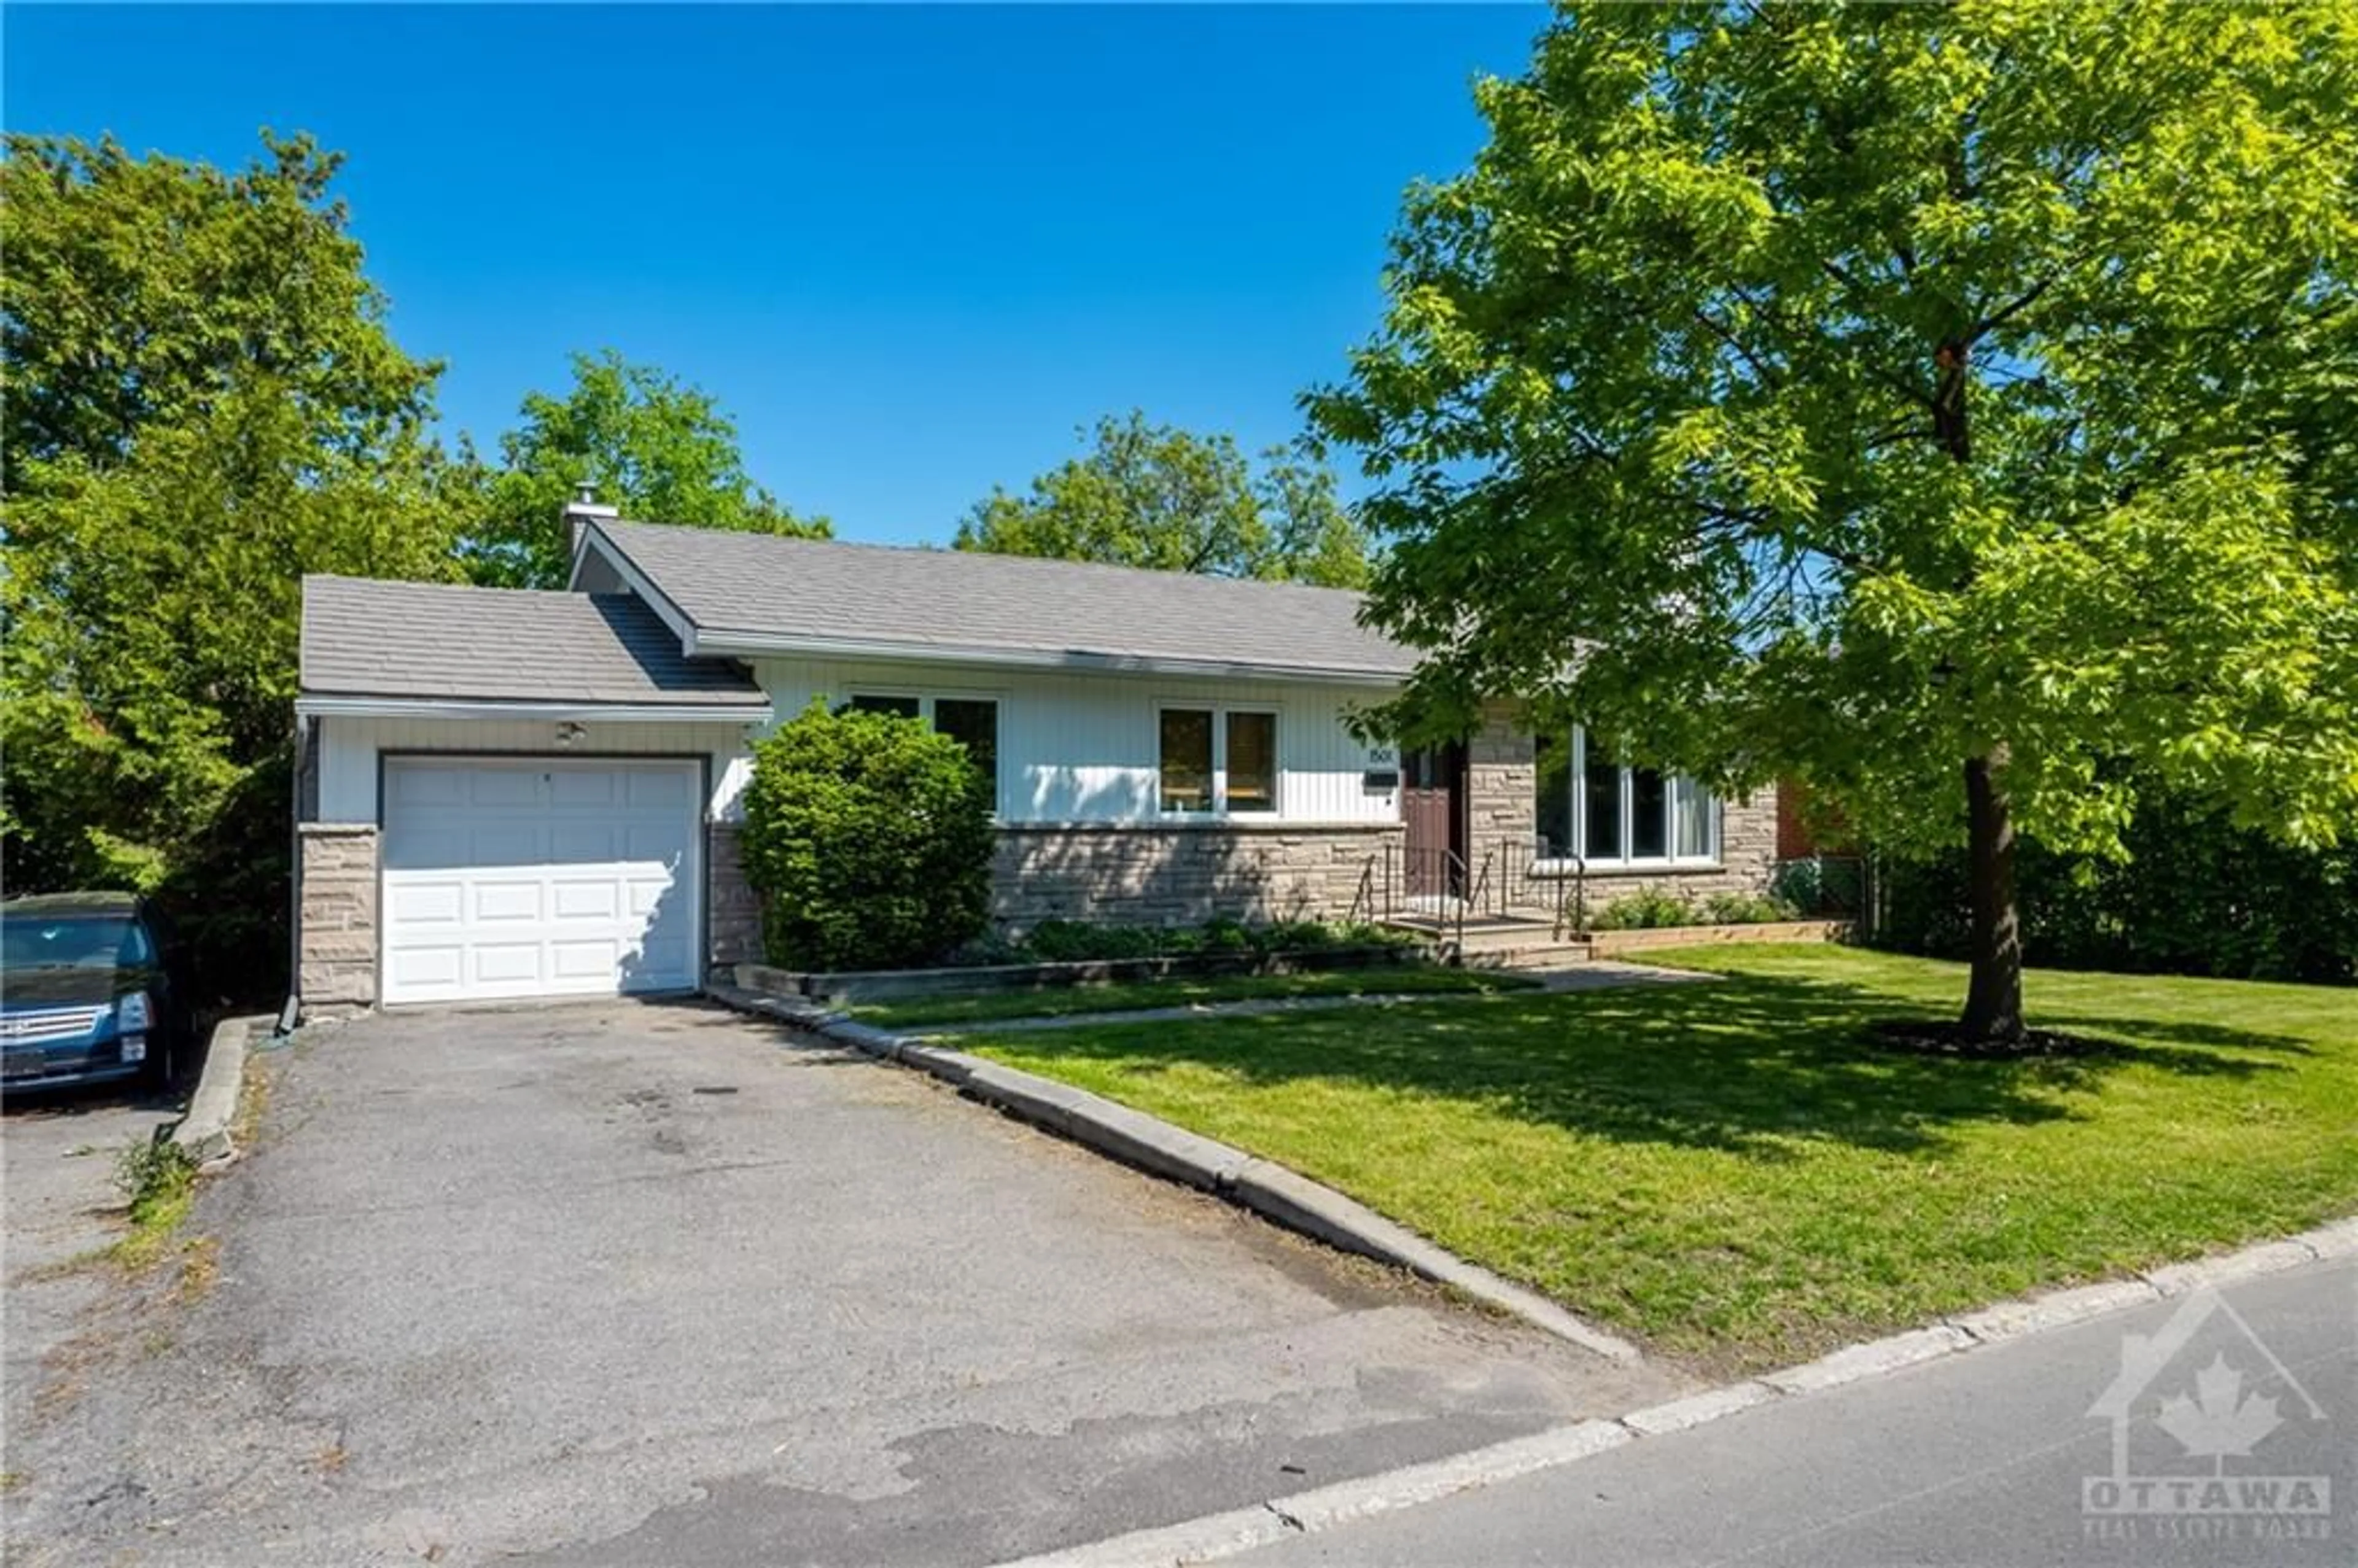 Frontside or backside of a home for 1501 EDGECLIFFE Ave, Ottawa Ontario K1Z 8G2